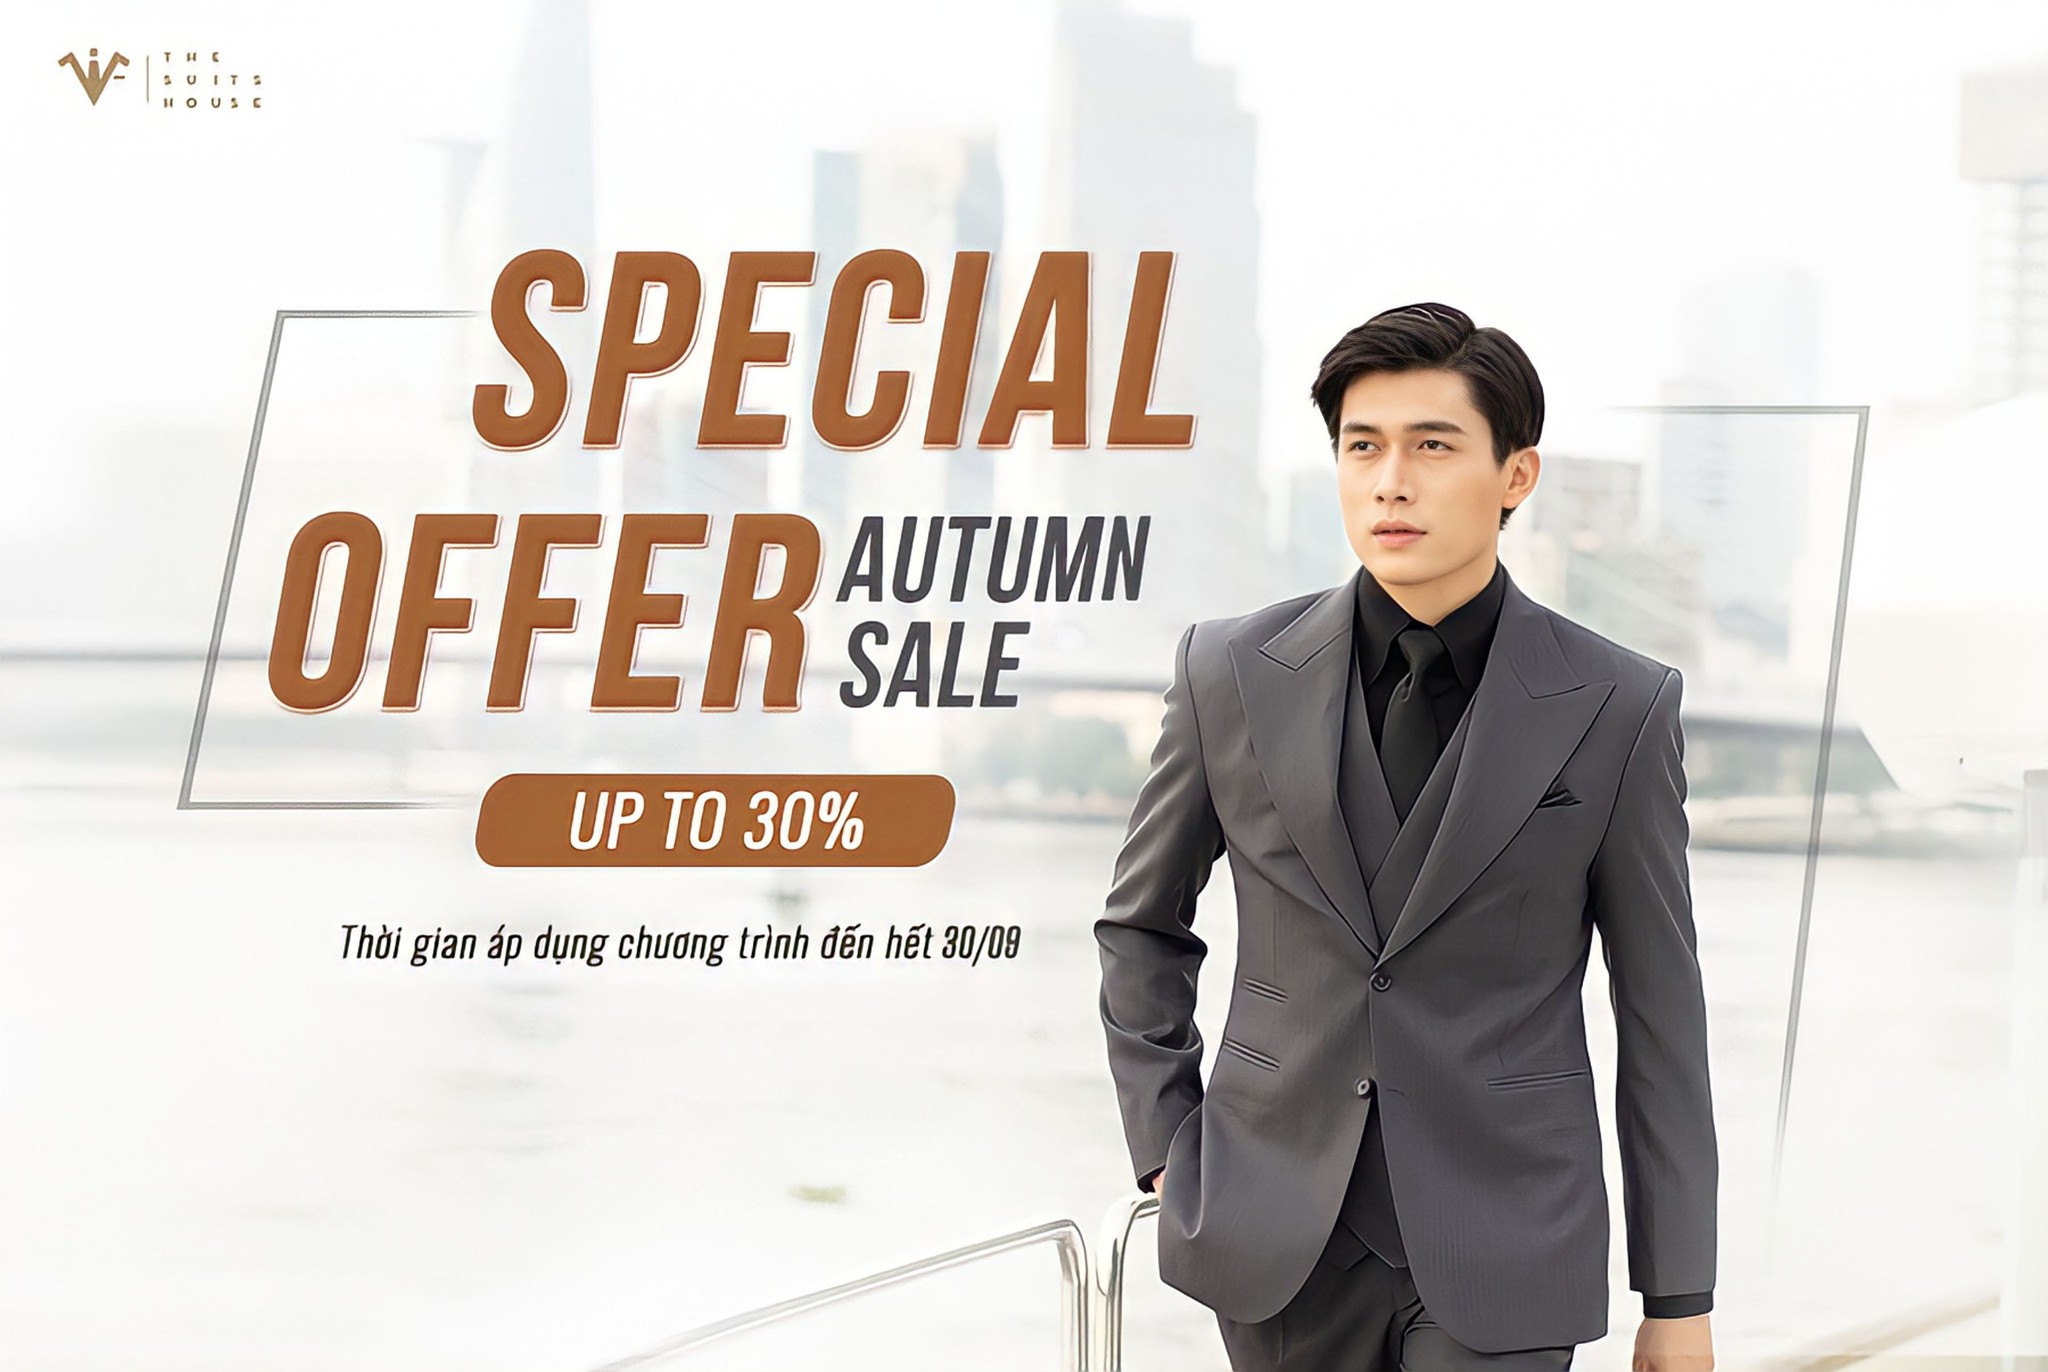 SPECIAL OFFER AUTUMN SALE